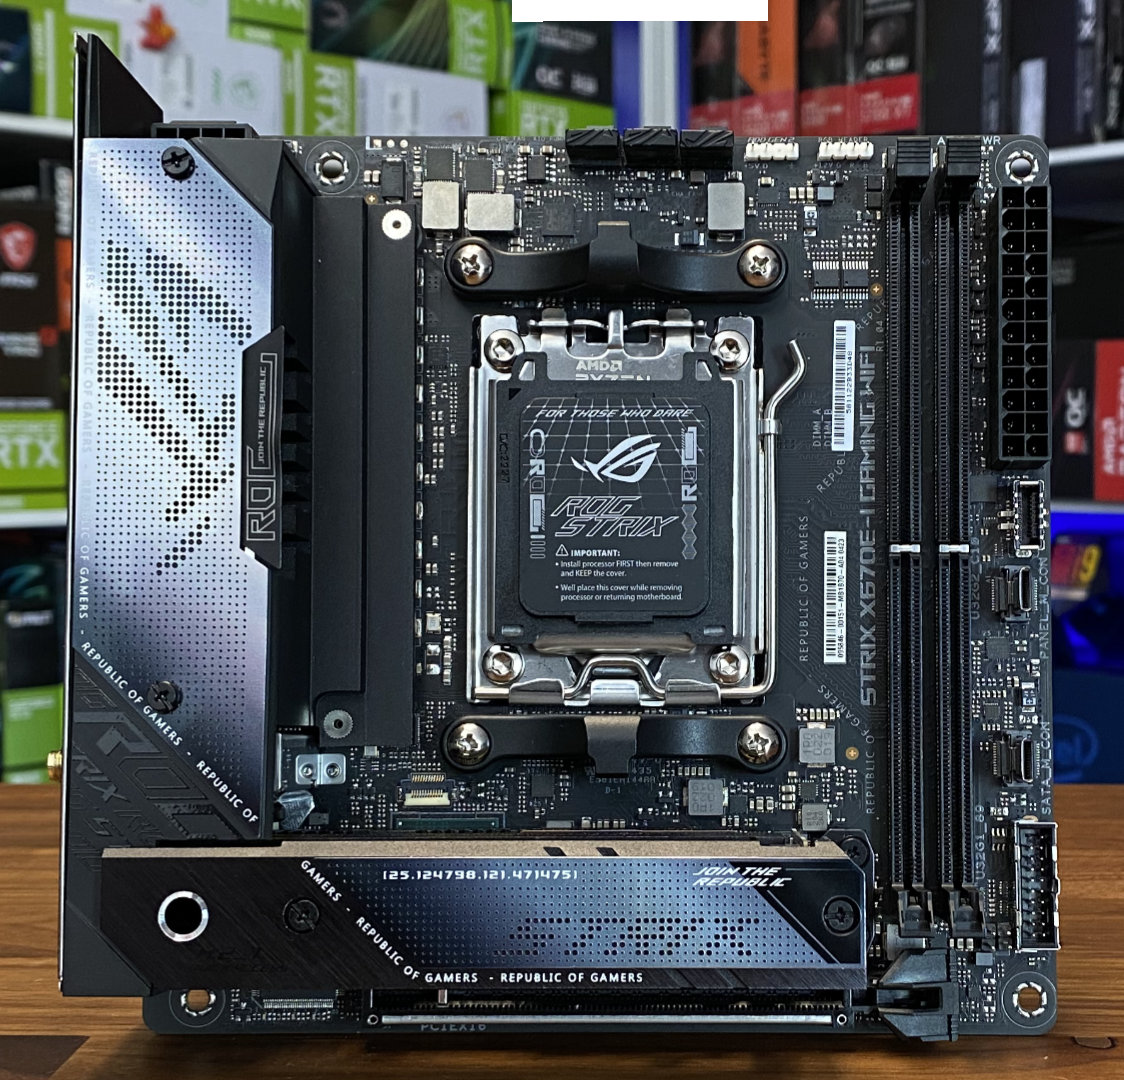 ASUS ROG STRIX X670E-I Gaming WiFi Motherboard Review - eTeknix